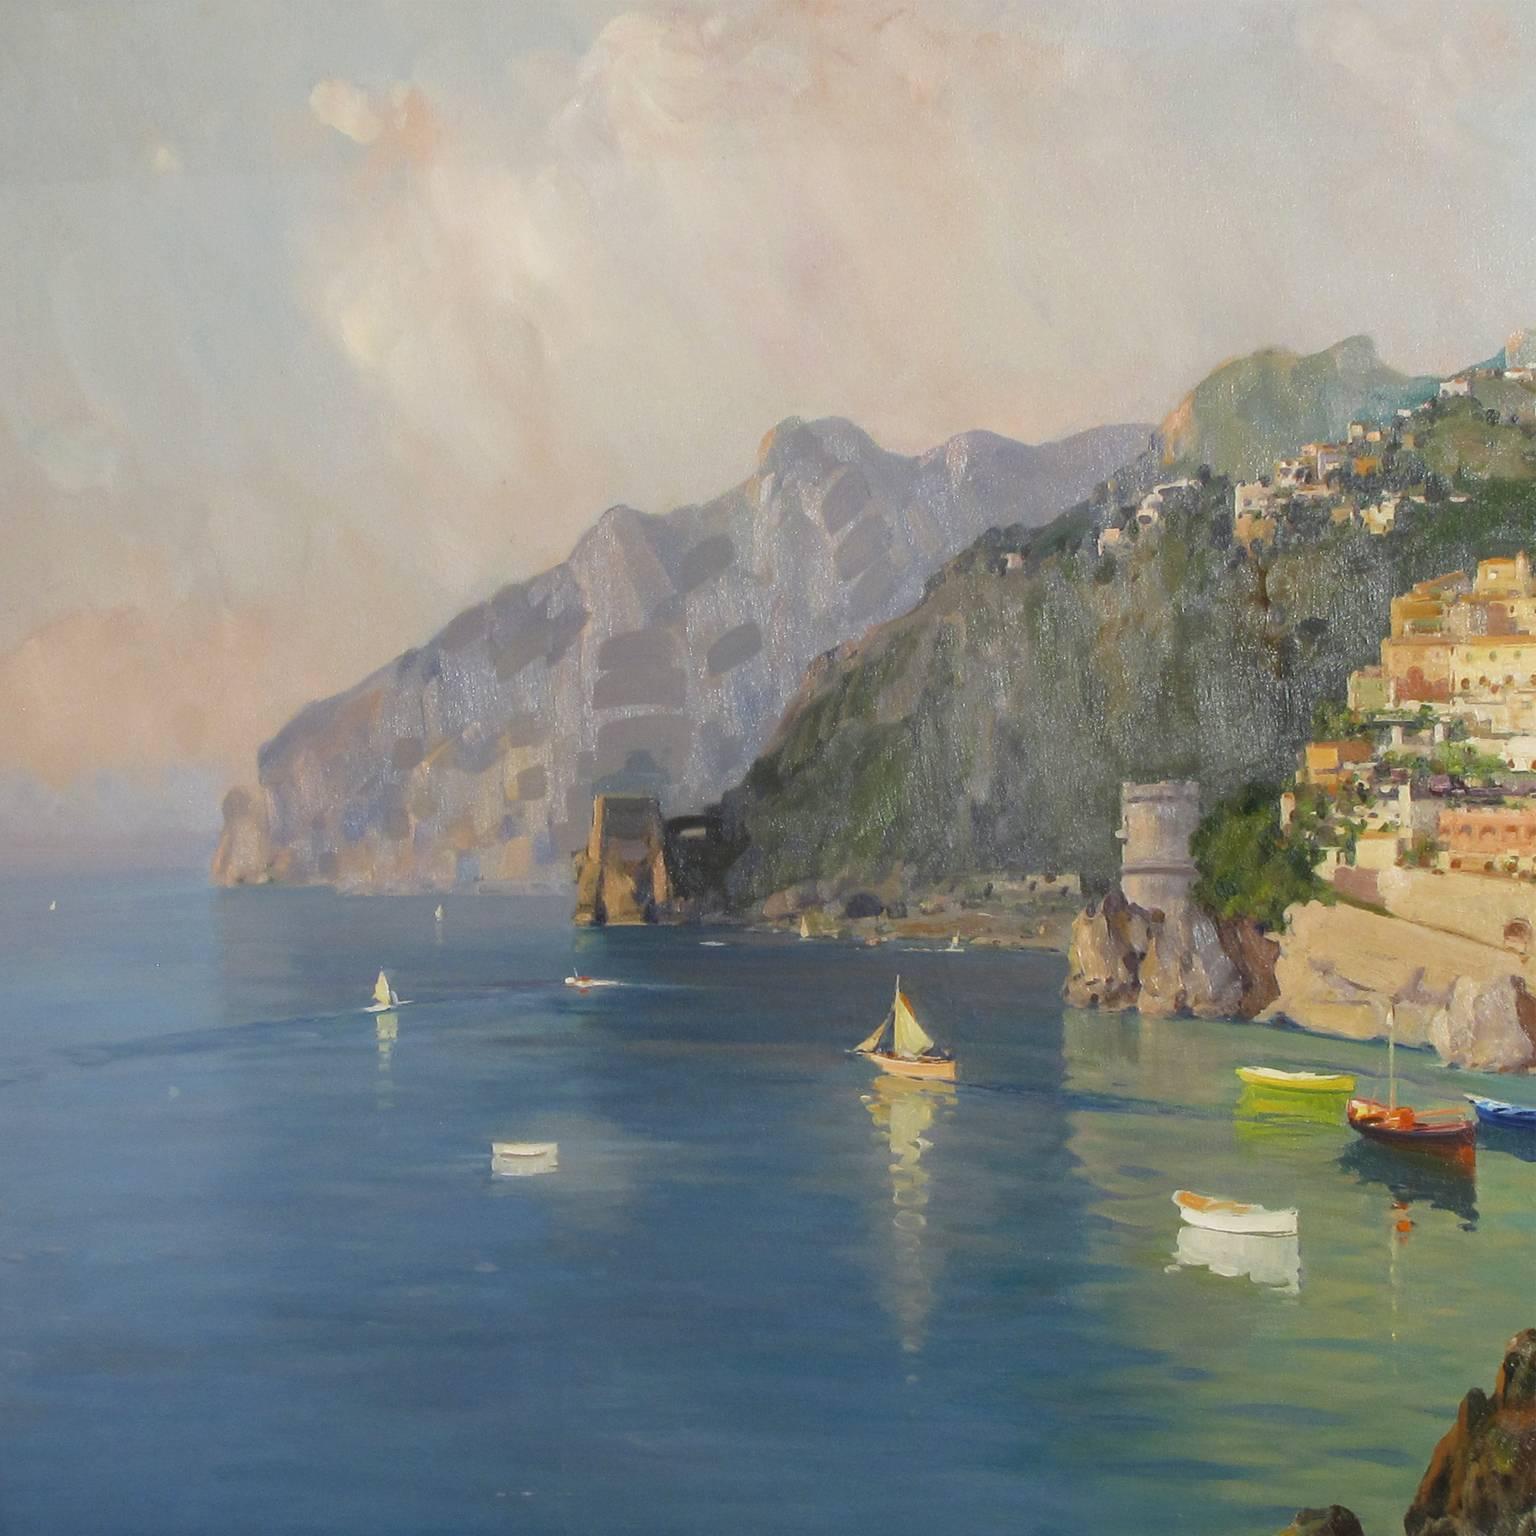 Guglielmo Pizzirani (Bologna, 1886–1971).
“Landscape depicting Positano, a village on the Amalfi Coast,”
Italy, 1919.
Oil on canvas. 
Coeval gilt wooden frame.
Signed and dated on the bottom right “G. Pizzirani ‘19.”
A pittoresque landscape of